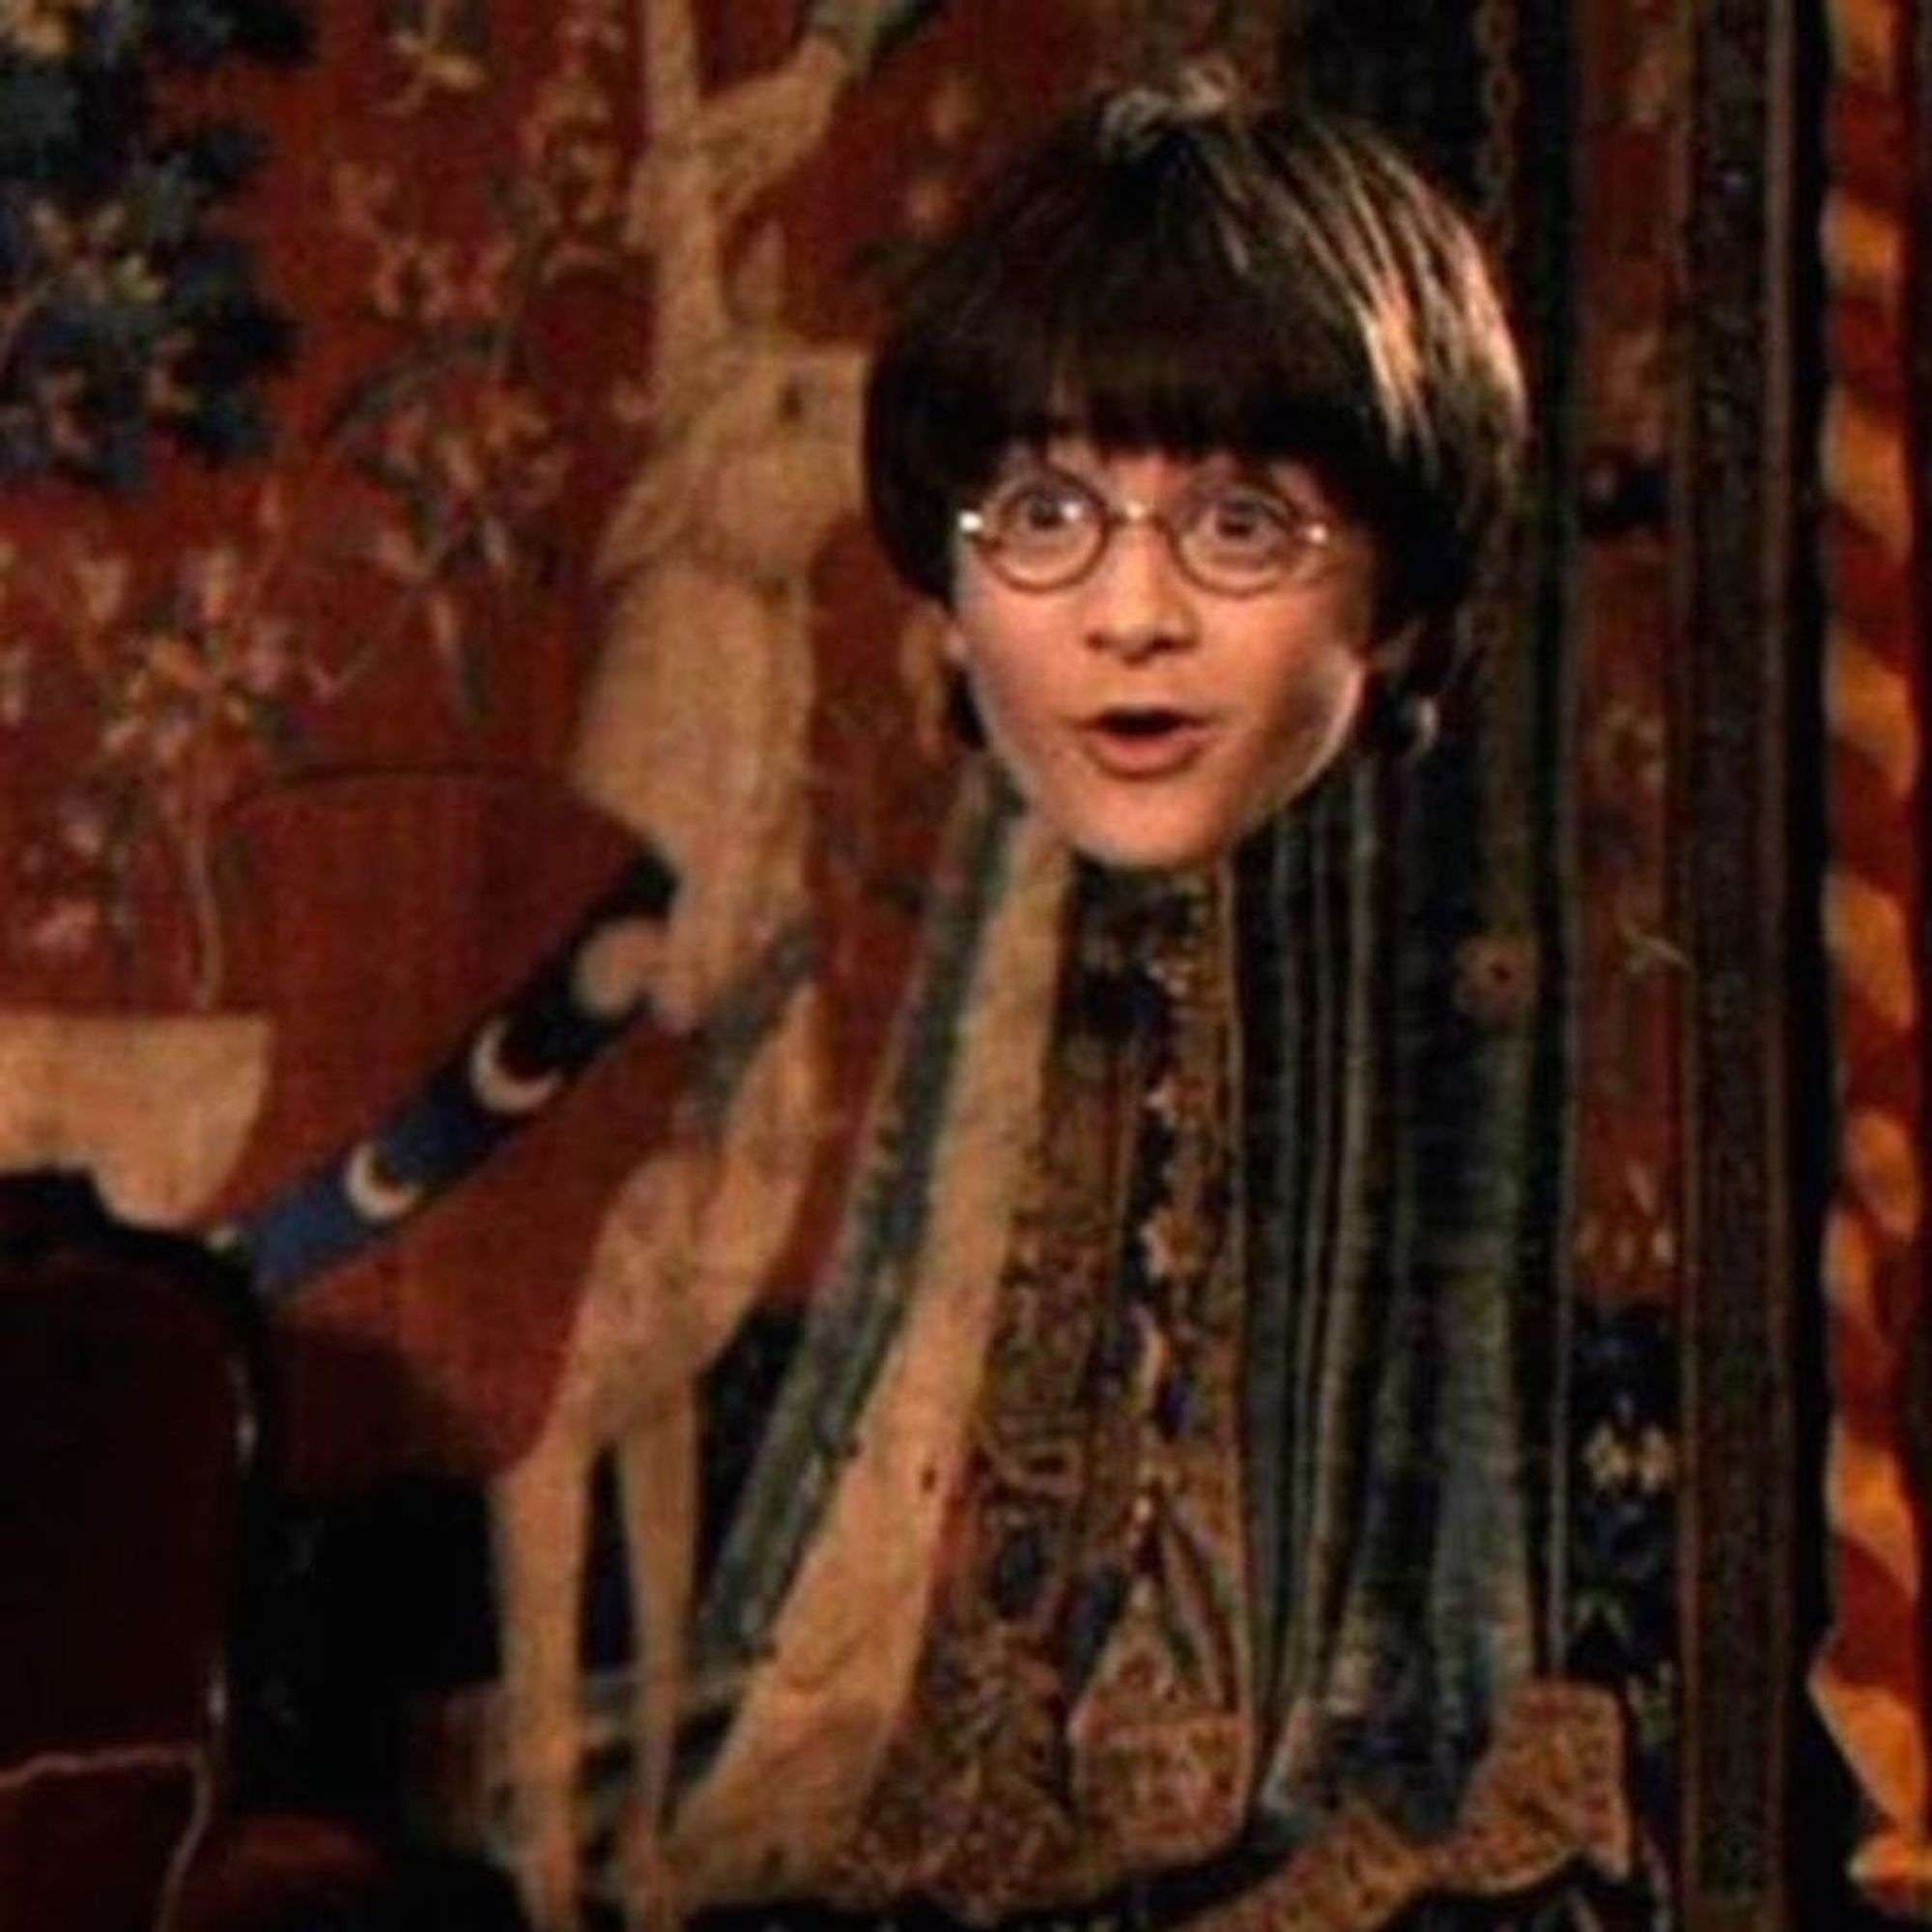 OMG: Harry Potterâs Invisibility Cloak May Actually Be a ...